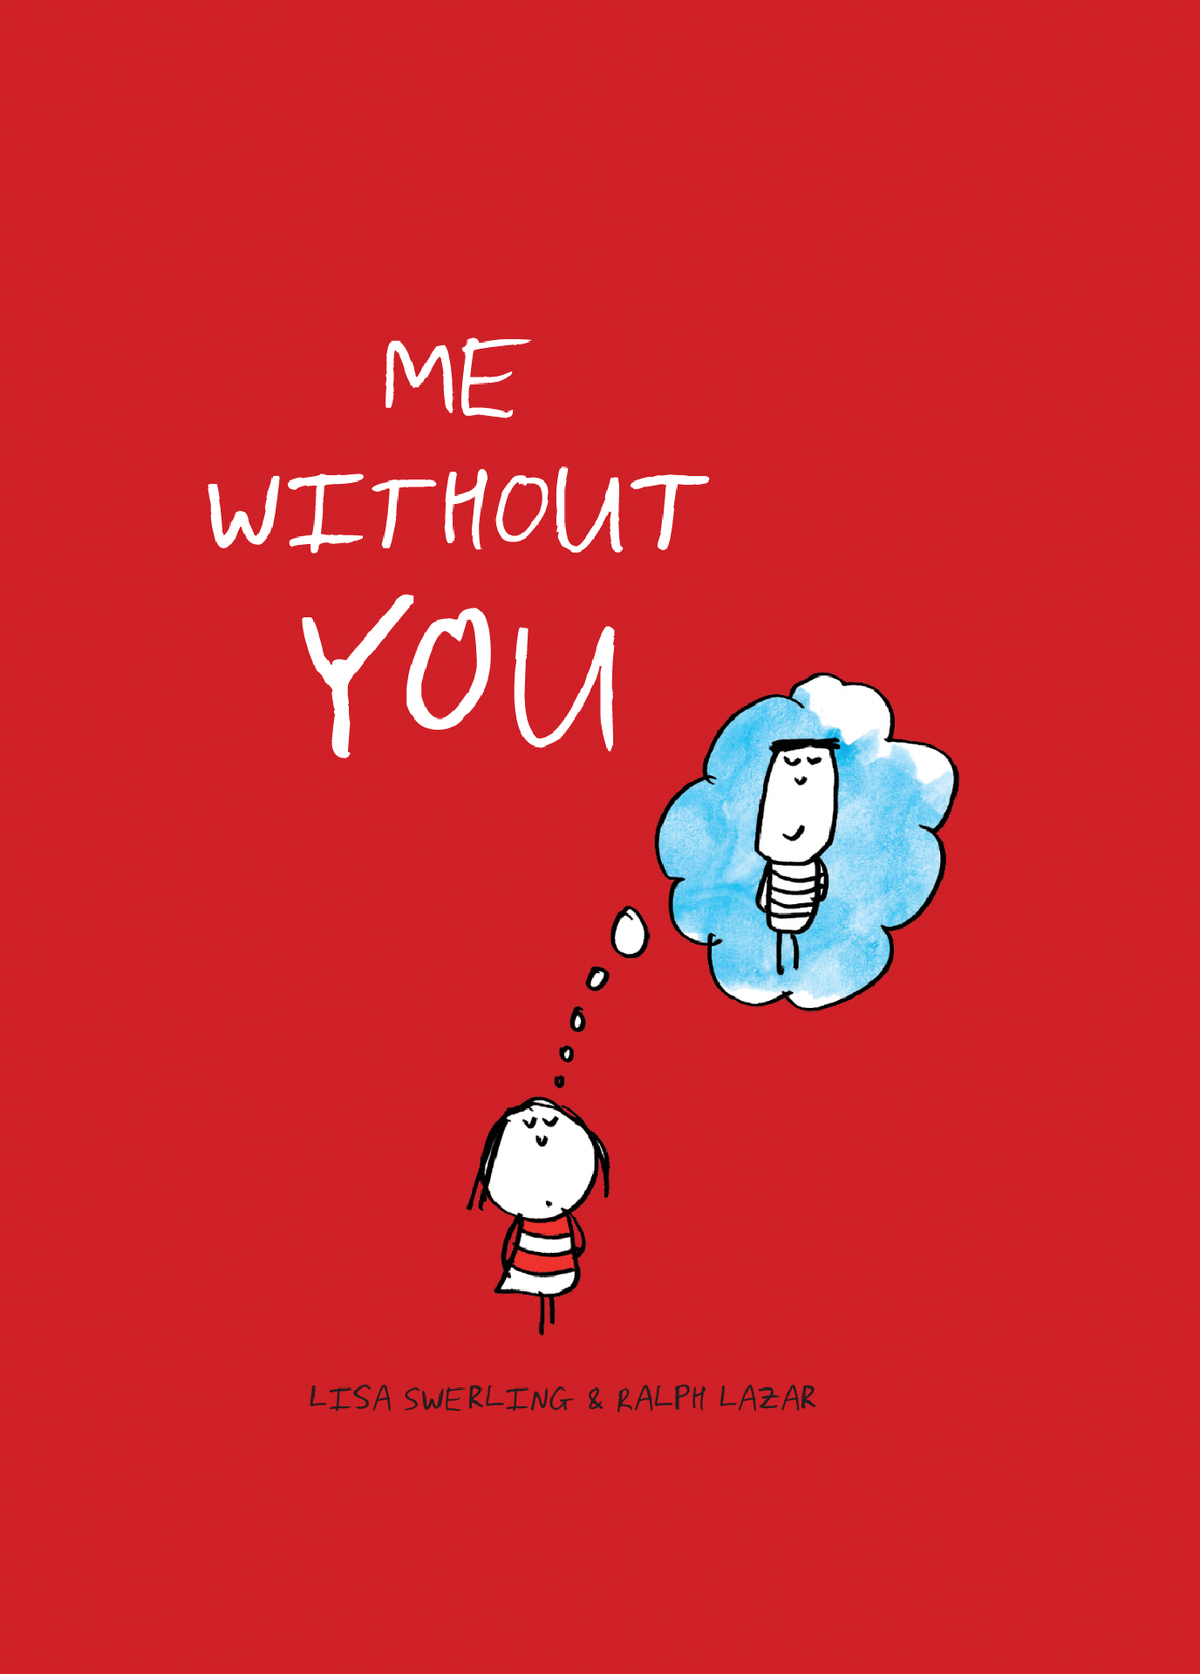 Me without you ( PDFDrive ) - By Lisa Swerling & Ralph Lazar me wiThOut ...